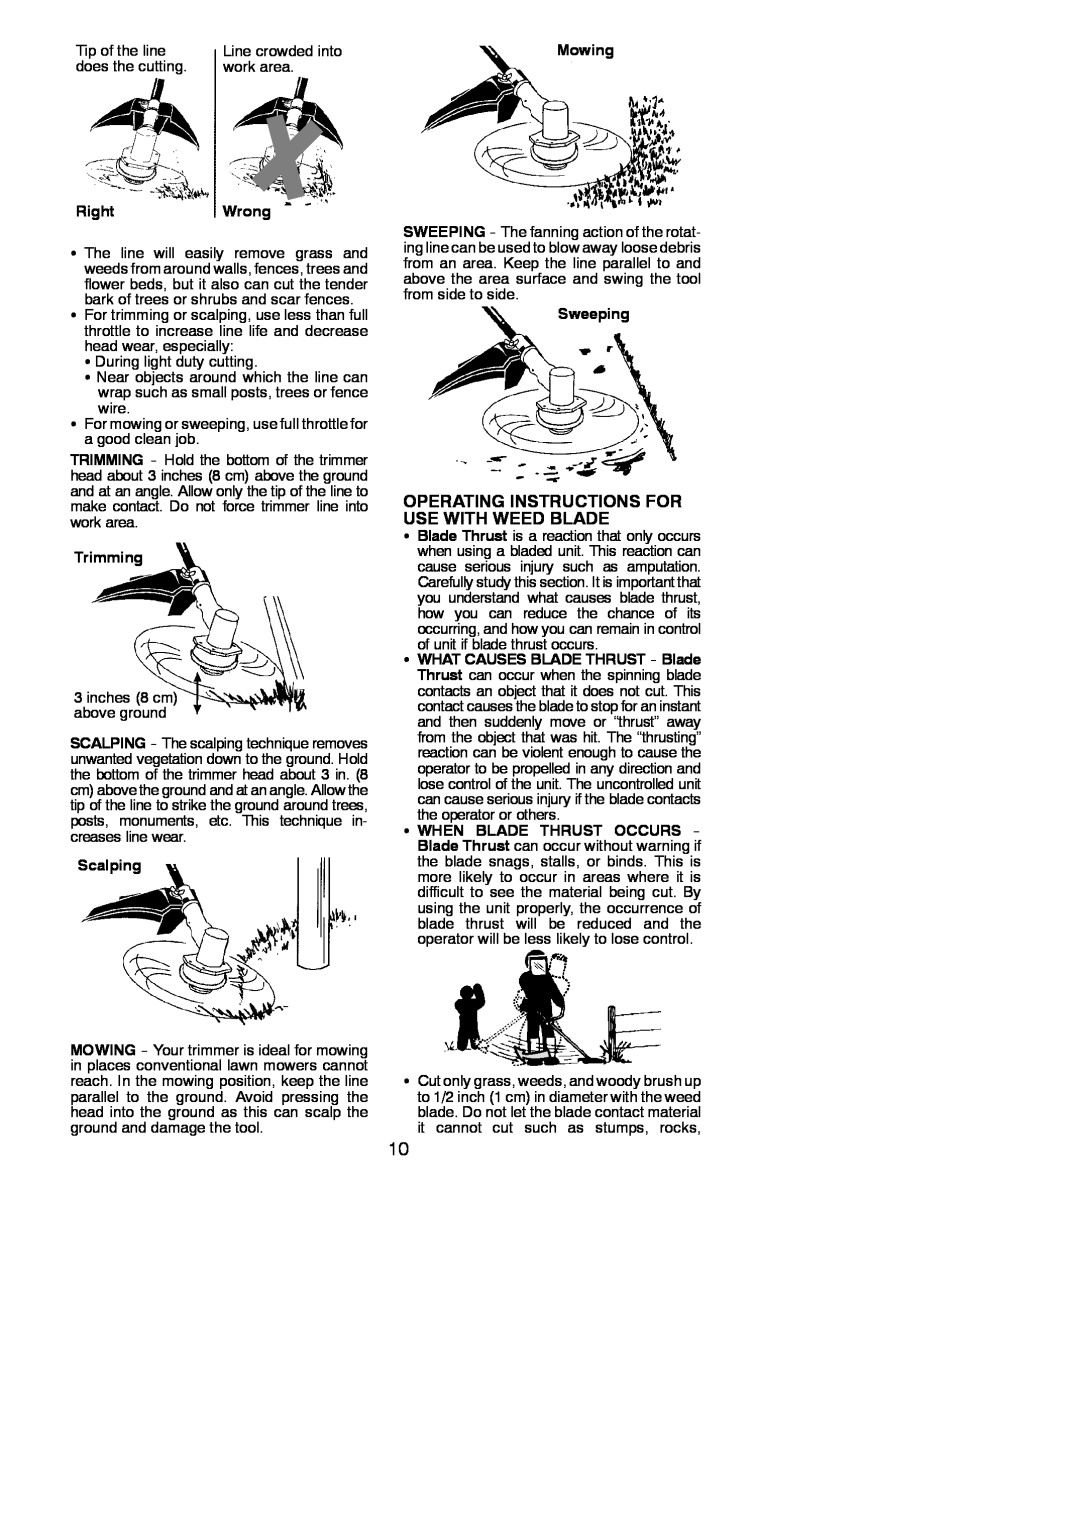 Poulan PPB350, 545117592 Operating Instructions For Use With Weed Blade, RightWrong, Trimming, Scalping, Mowing, Sweeping 